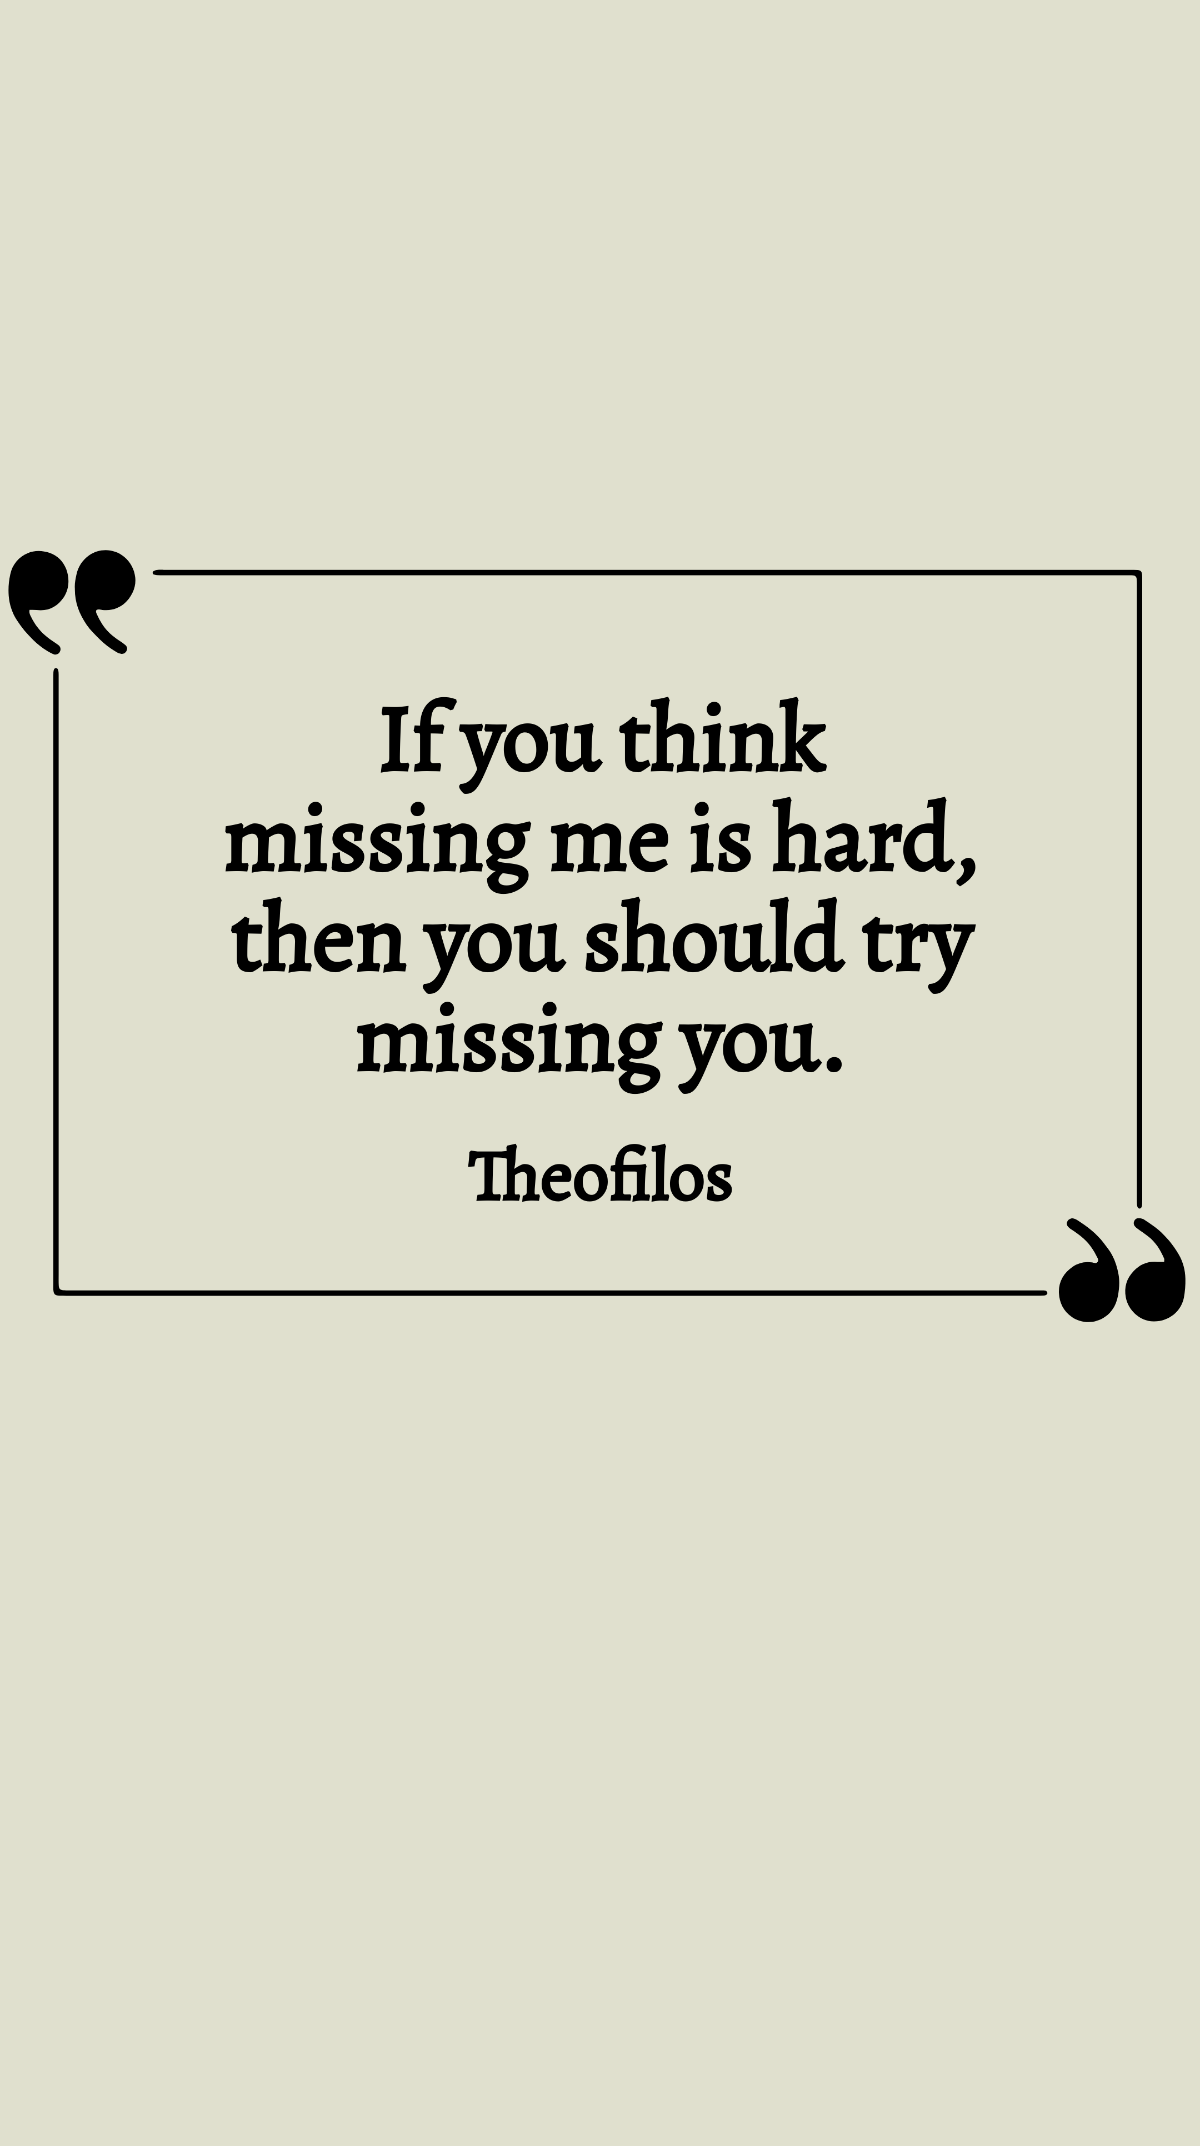 Free Theofilos - If you think missing me is hard, then you should try missing you. Template